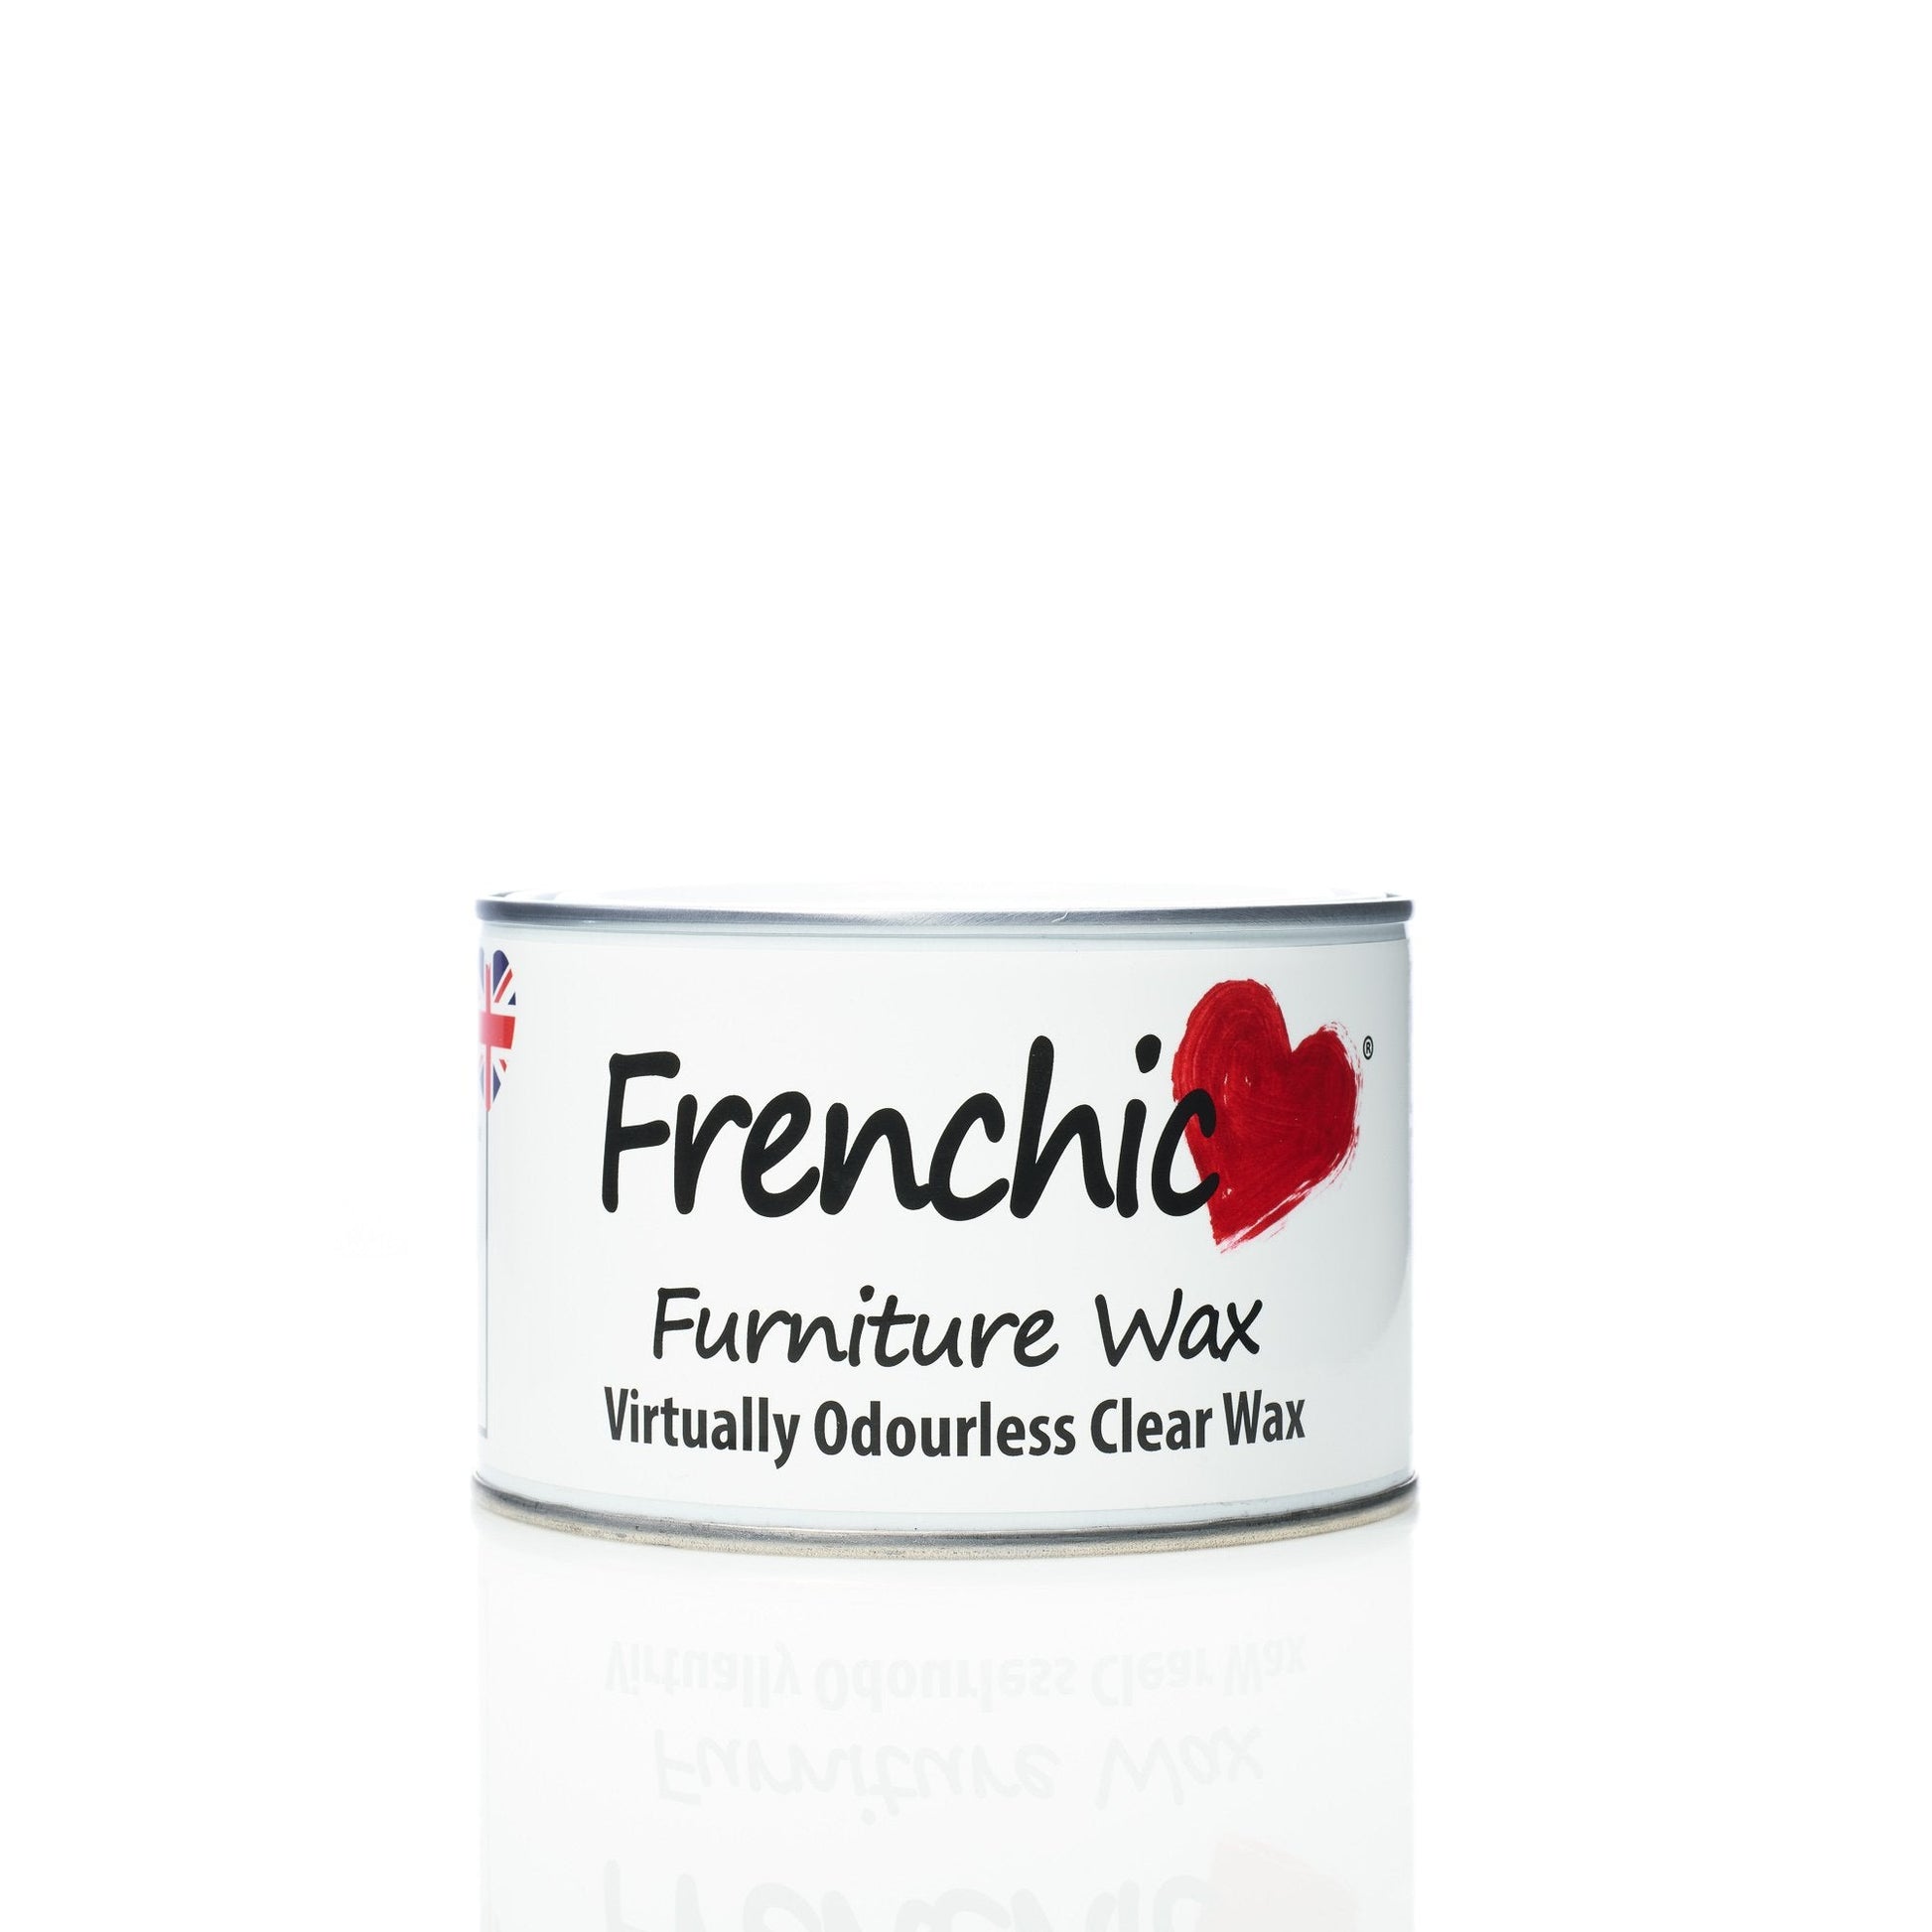 Frenchic, clear wax, odourless, furniture wax